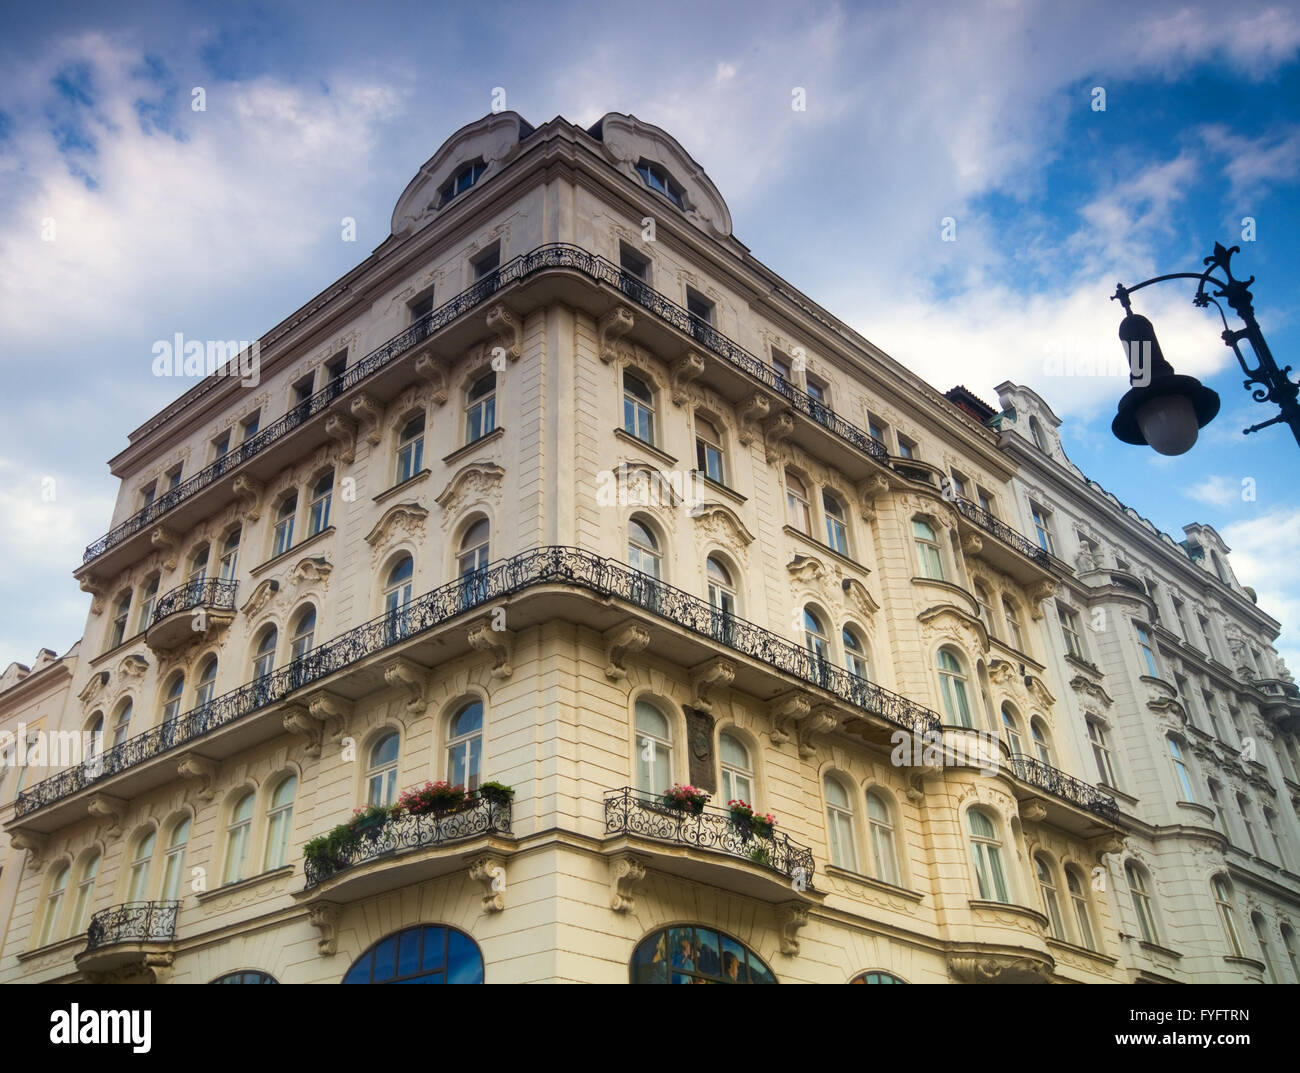 Prague. Old, charming building Stock Photo